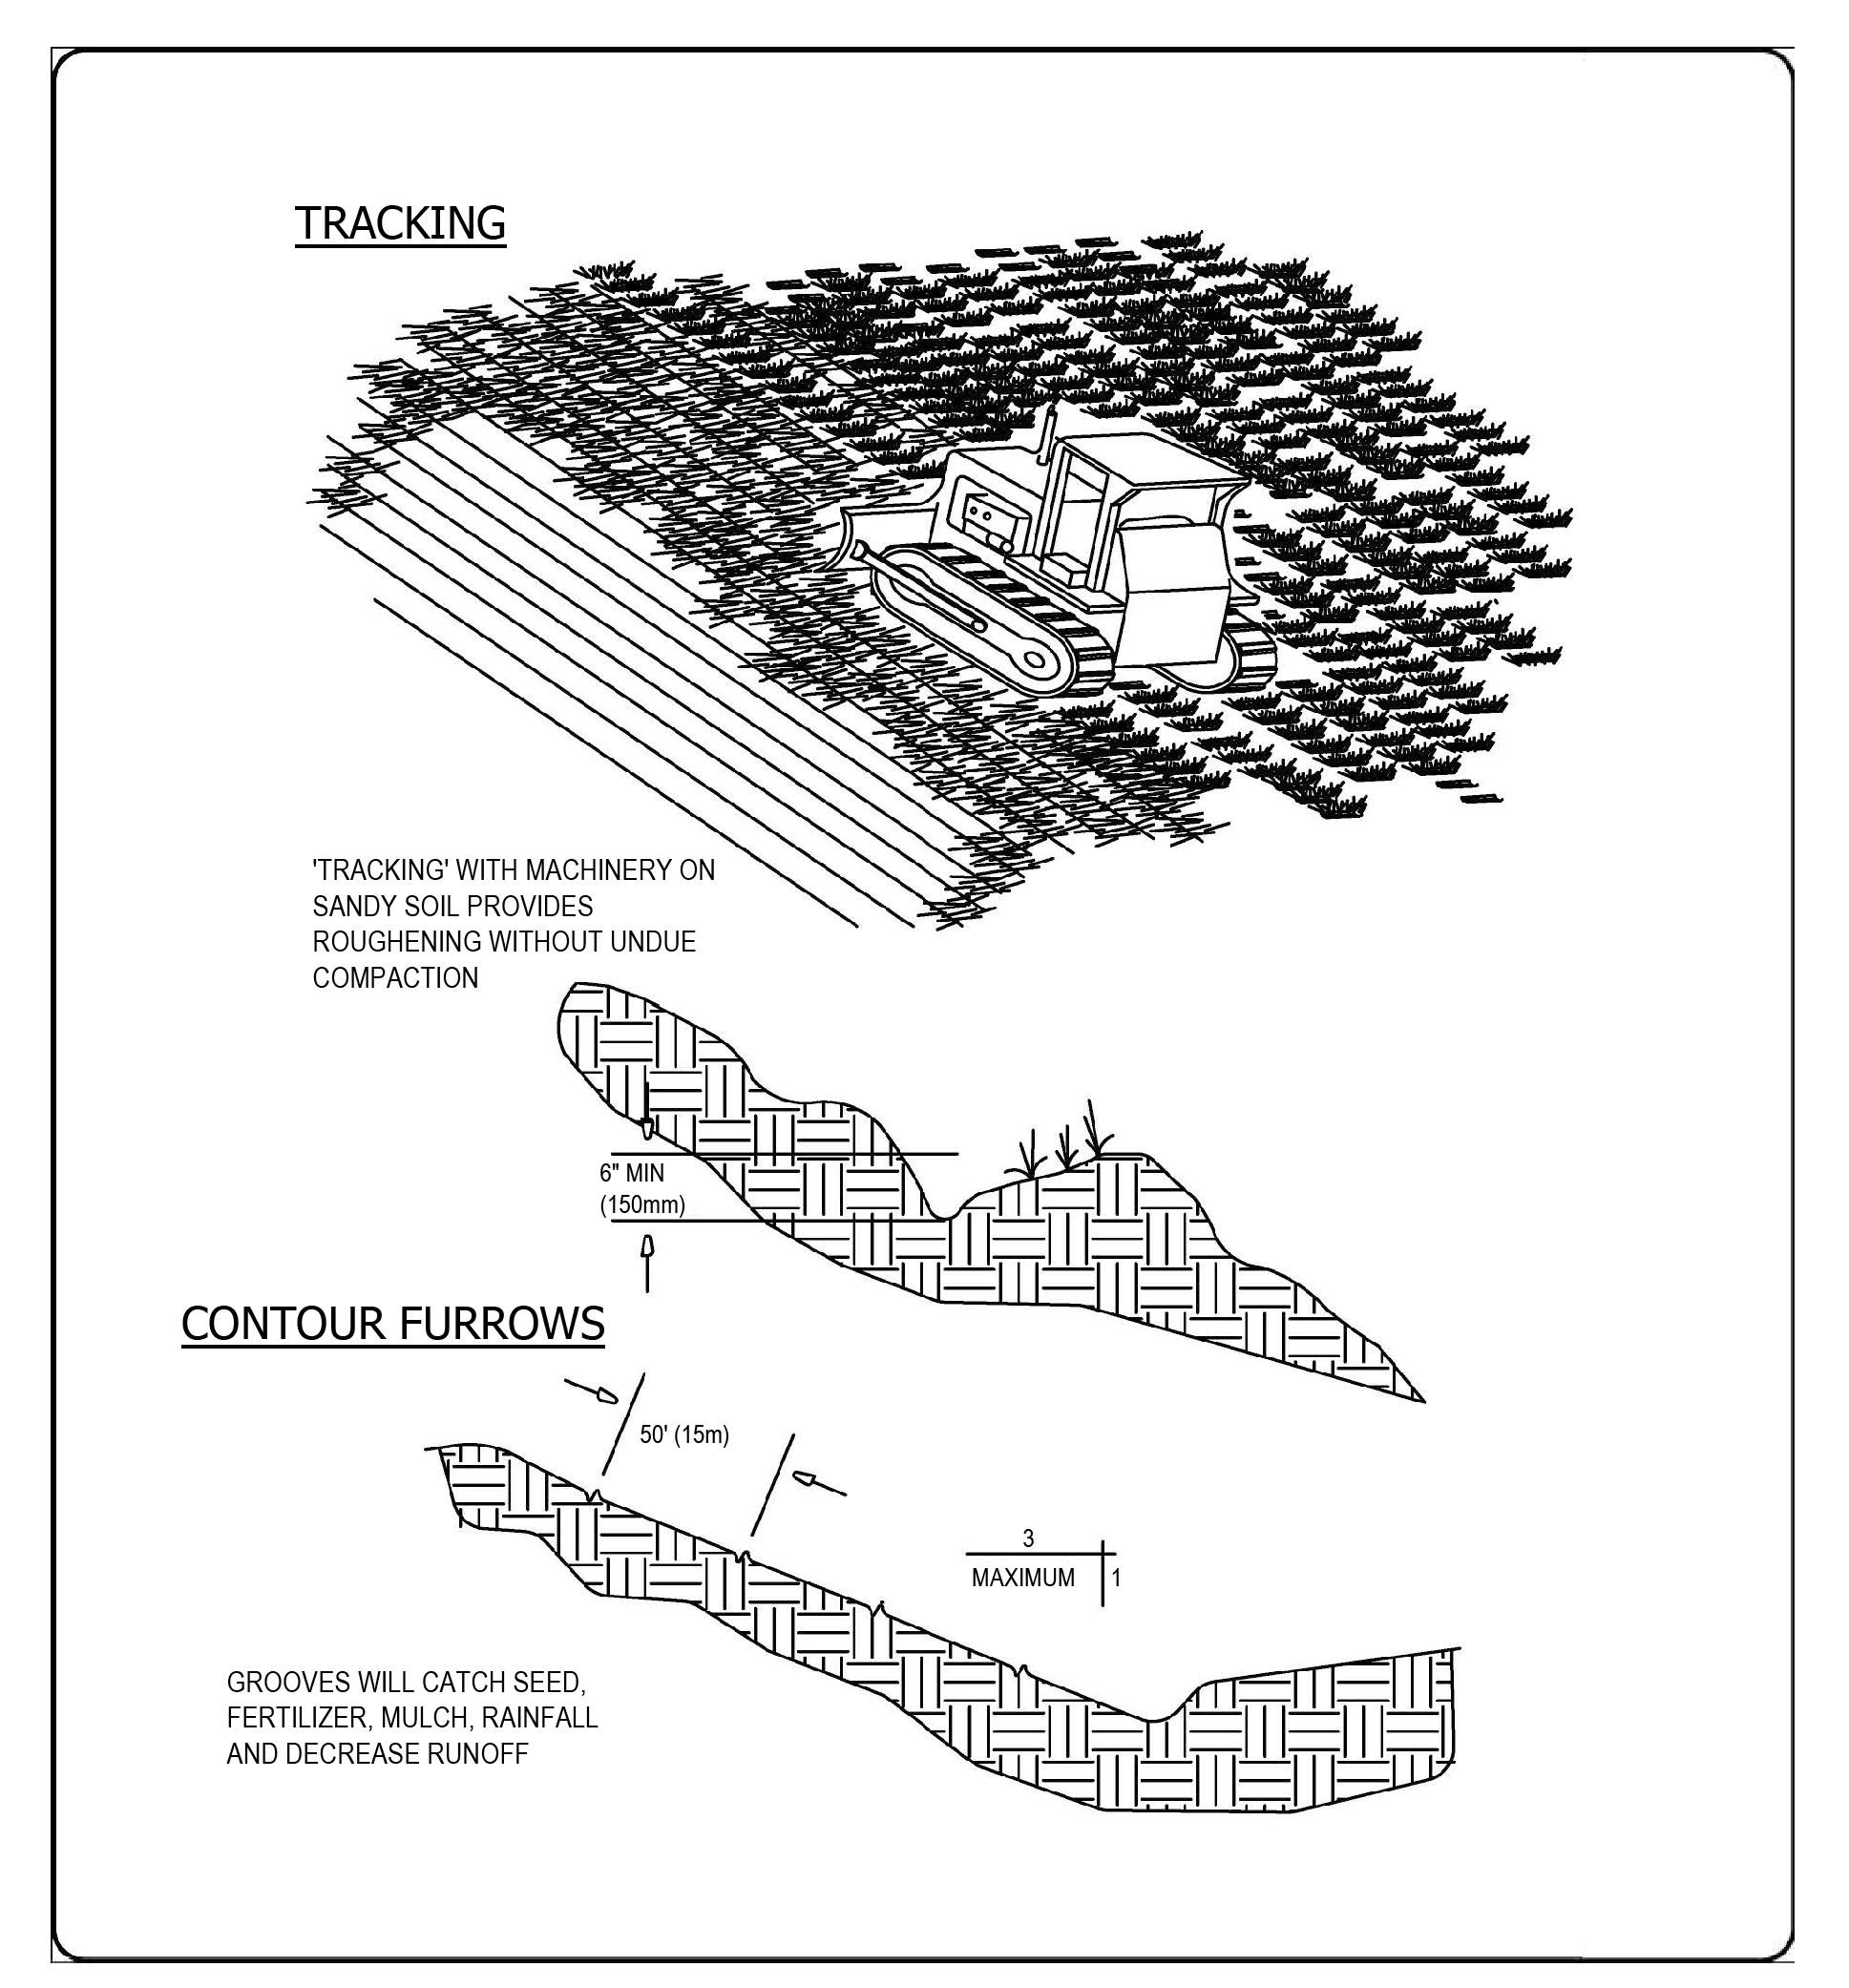 Figure 3-5 Surface Roughening by Tracking and Contour Furrows